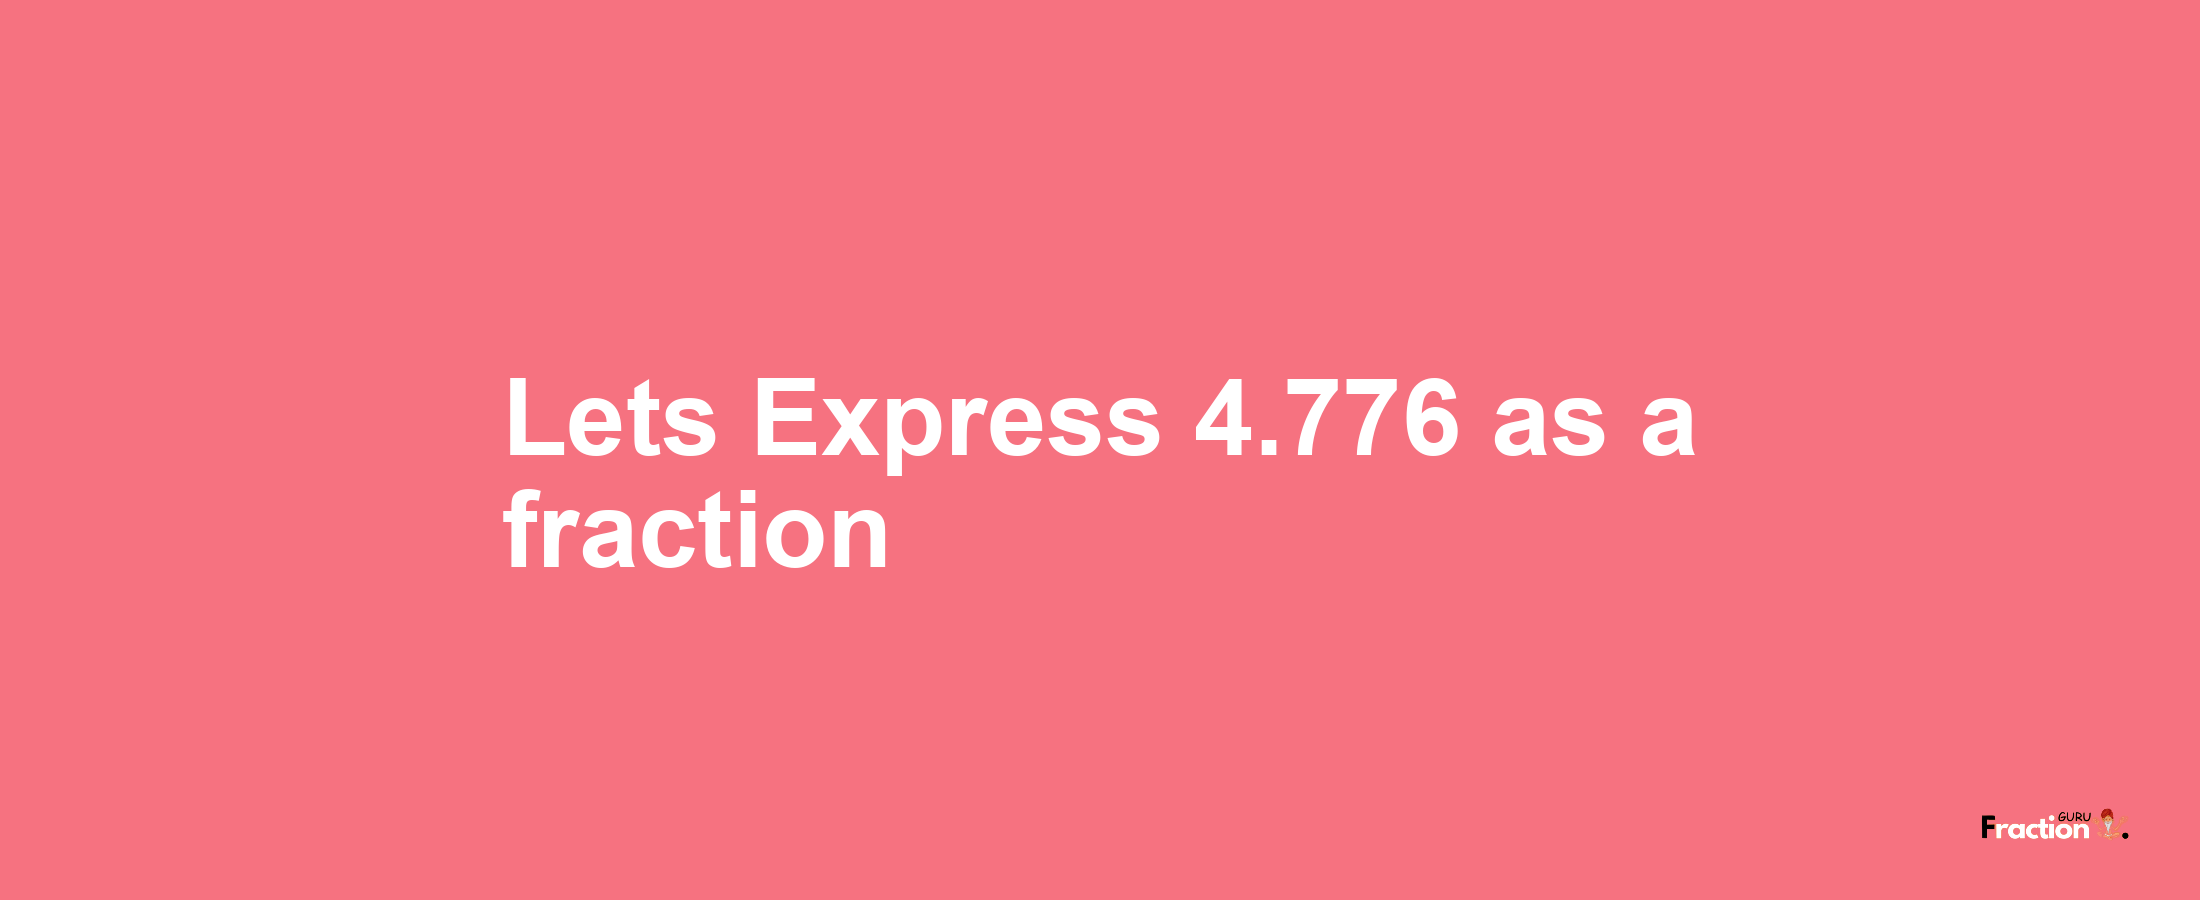 Lets Express 4.776 as afraction